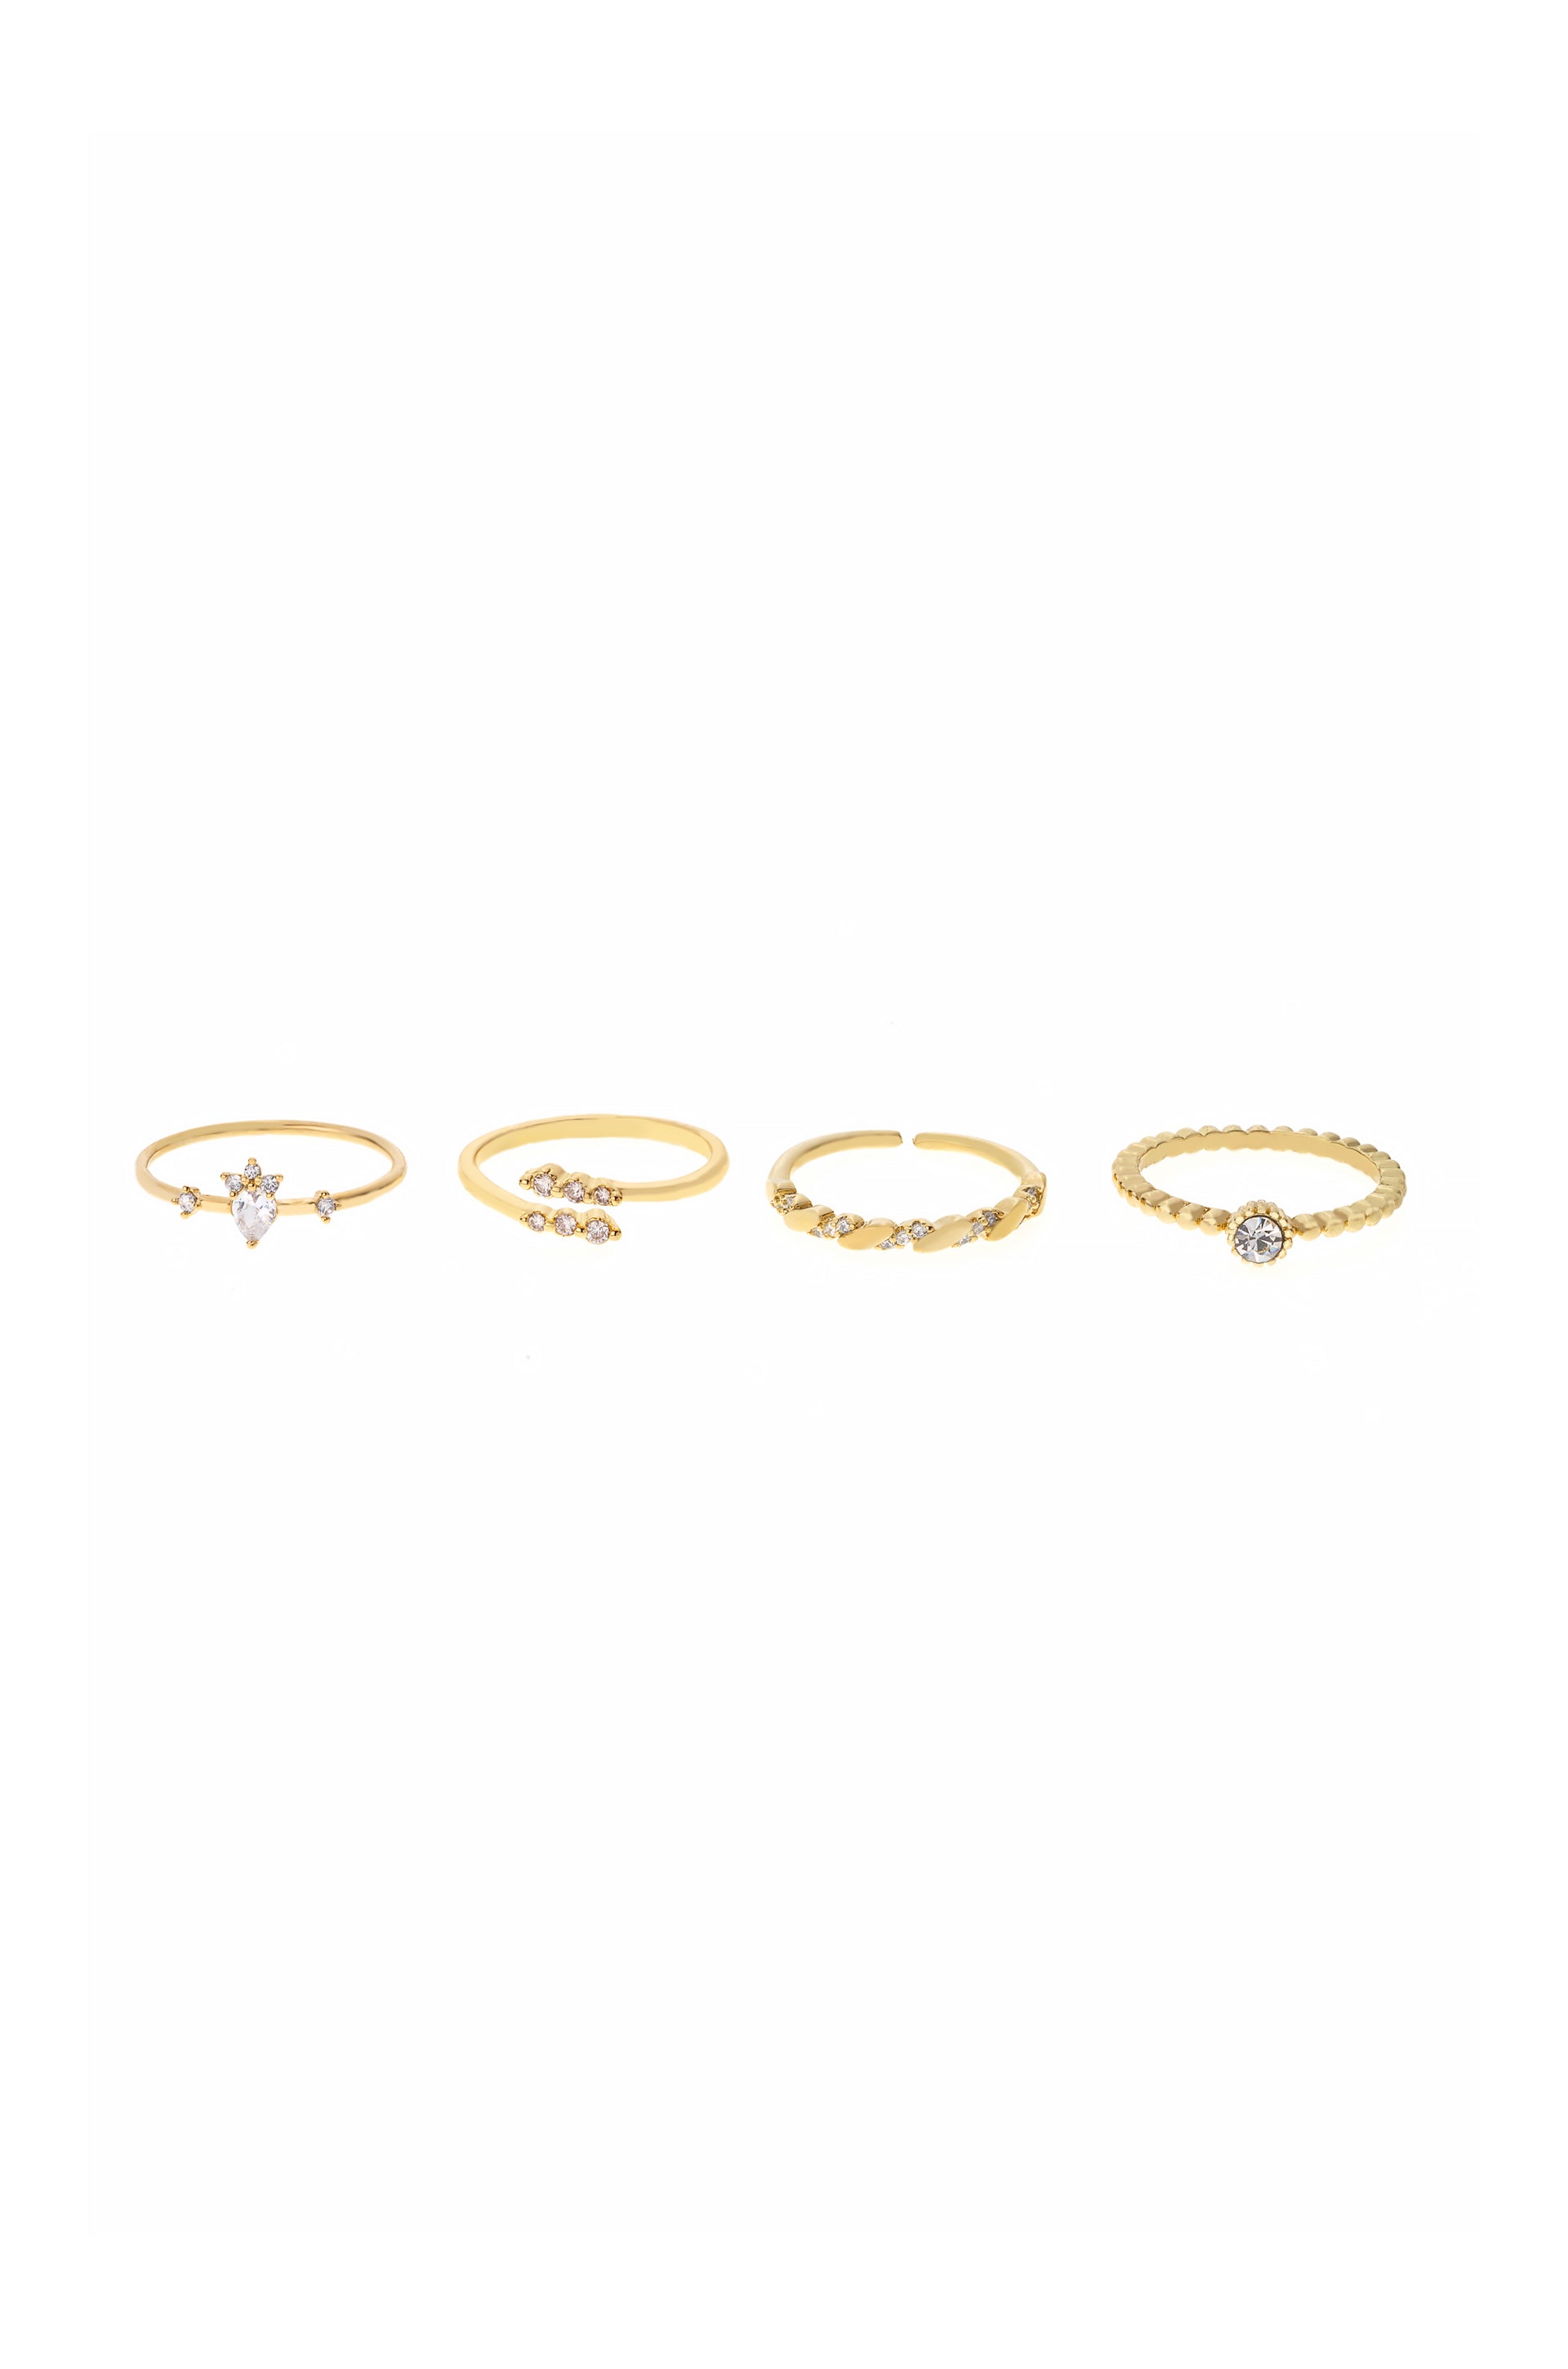 Keep It Simple 18k Gold Plated Ring Set on white